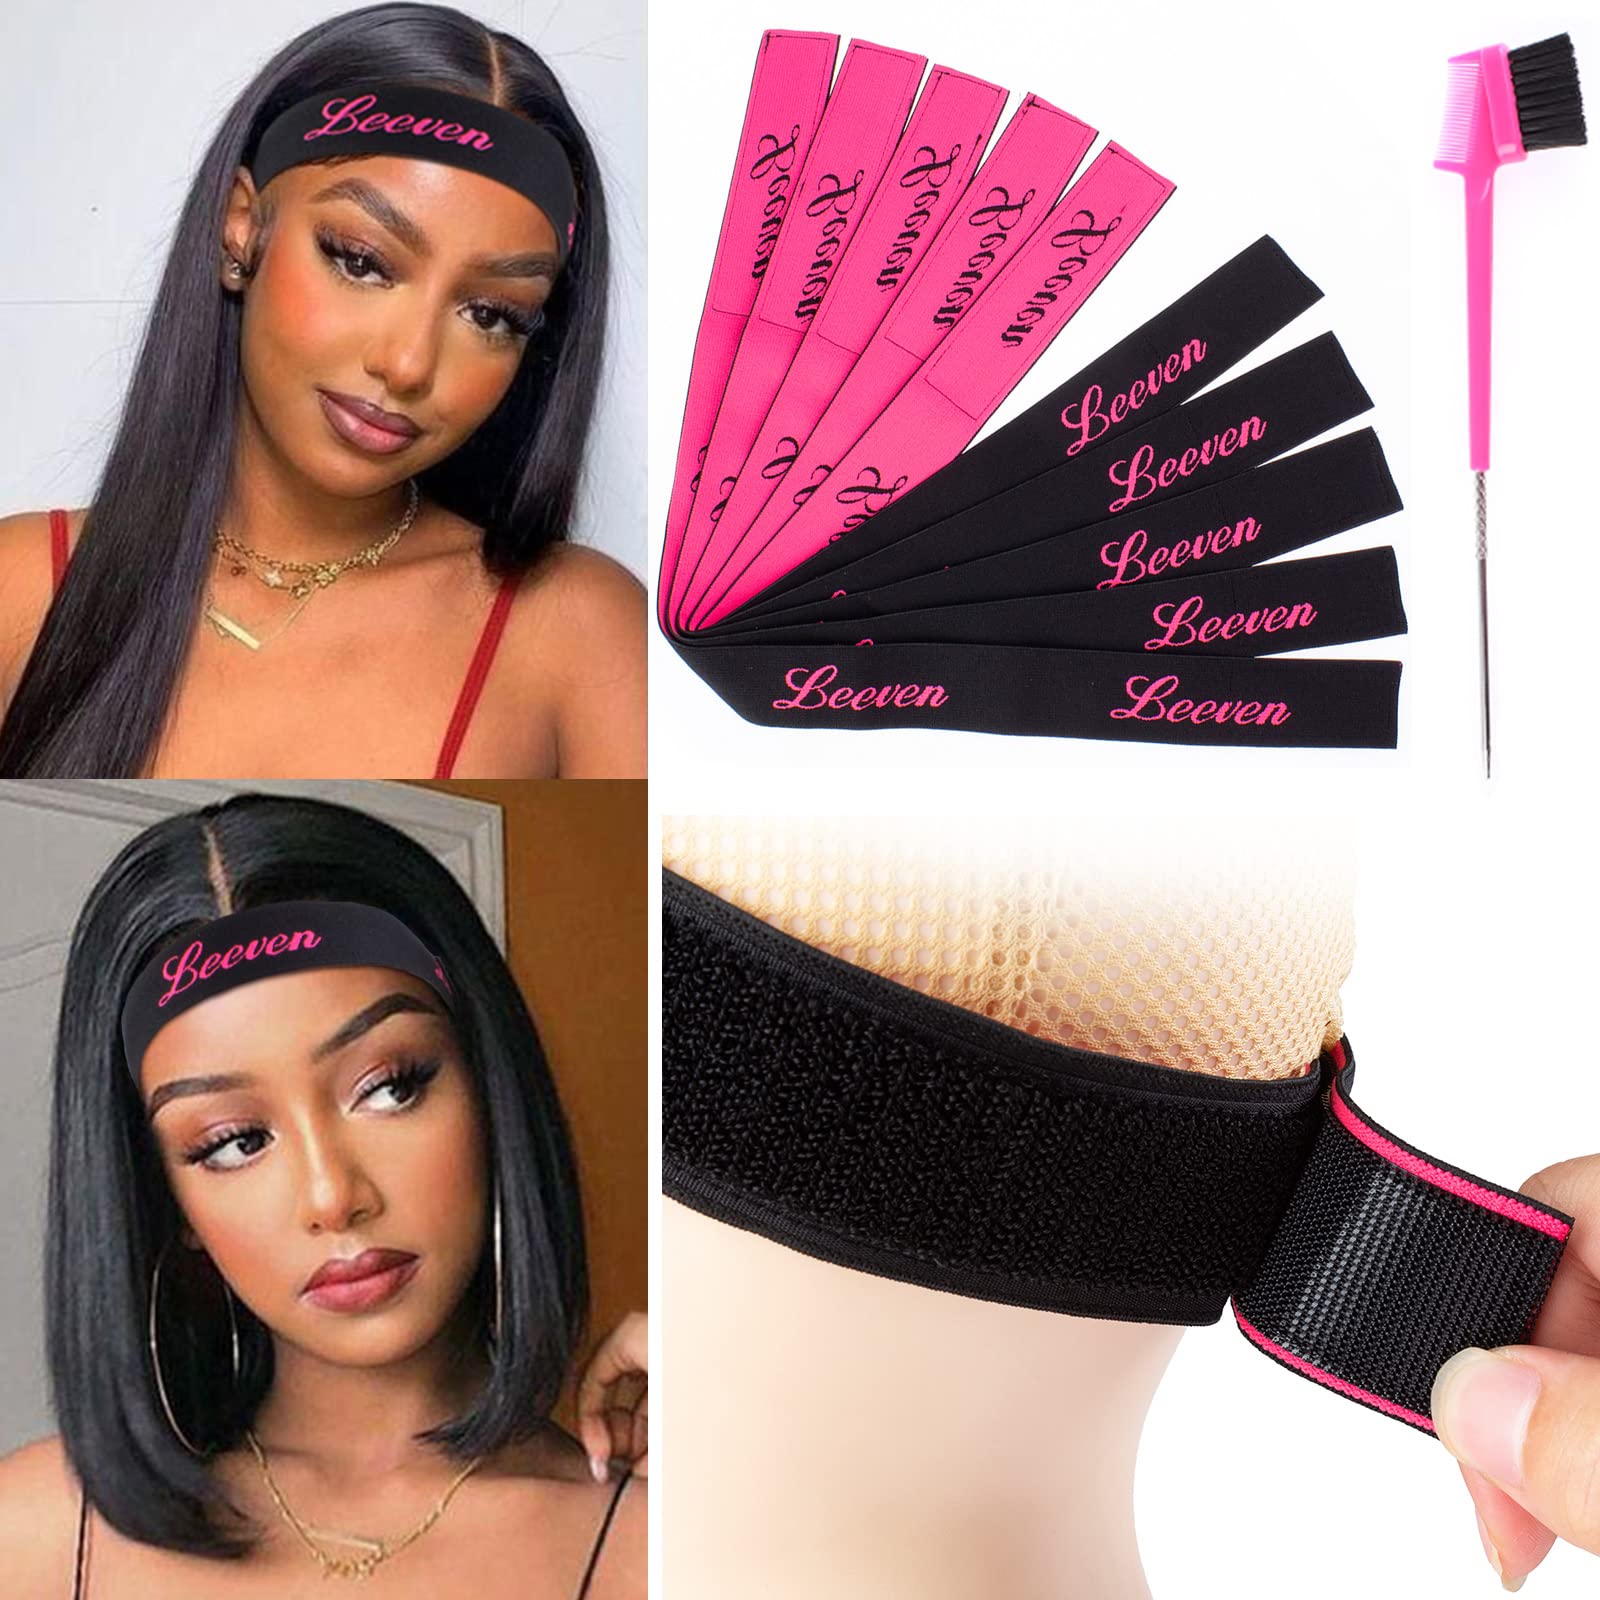 Shein 1Pcs Elastic Band for Lace Frontal Melt,Lace Melting Band for Lace Wigs, Elastic Band for Melting Lace, Lace Band Wig Bands for Edges Wig Melt Band